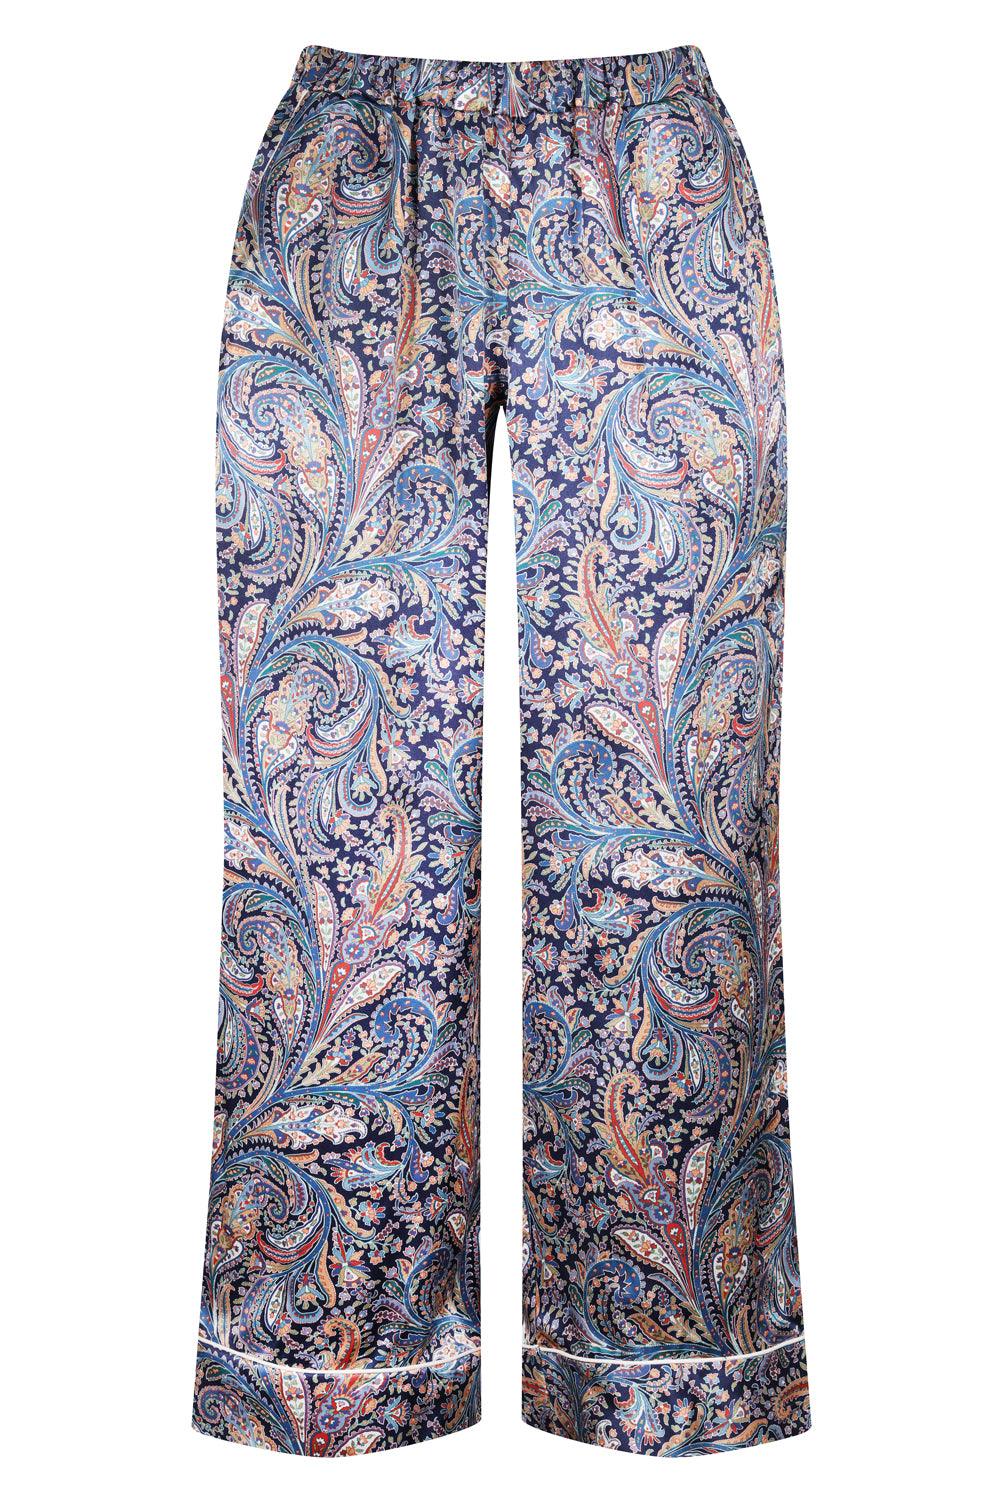 Women's Silk Pyjama Trousers made with Liberty Fabric GREAT MISSENDEN - Coco & Wolf